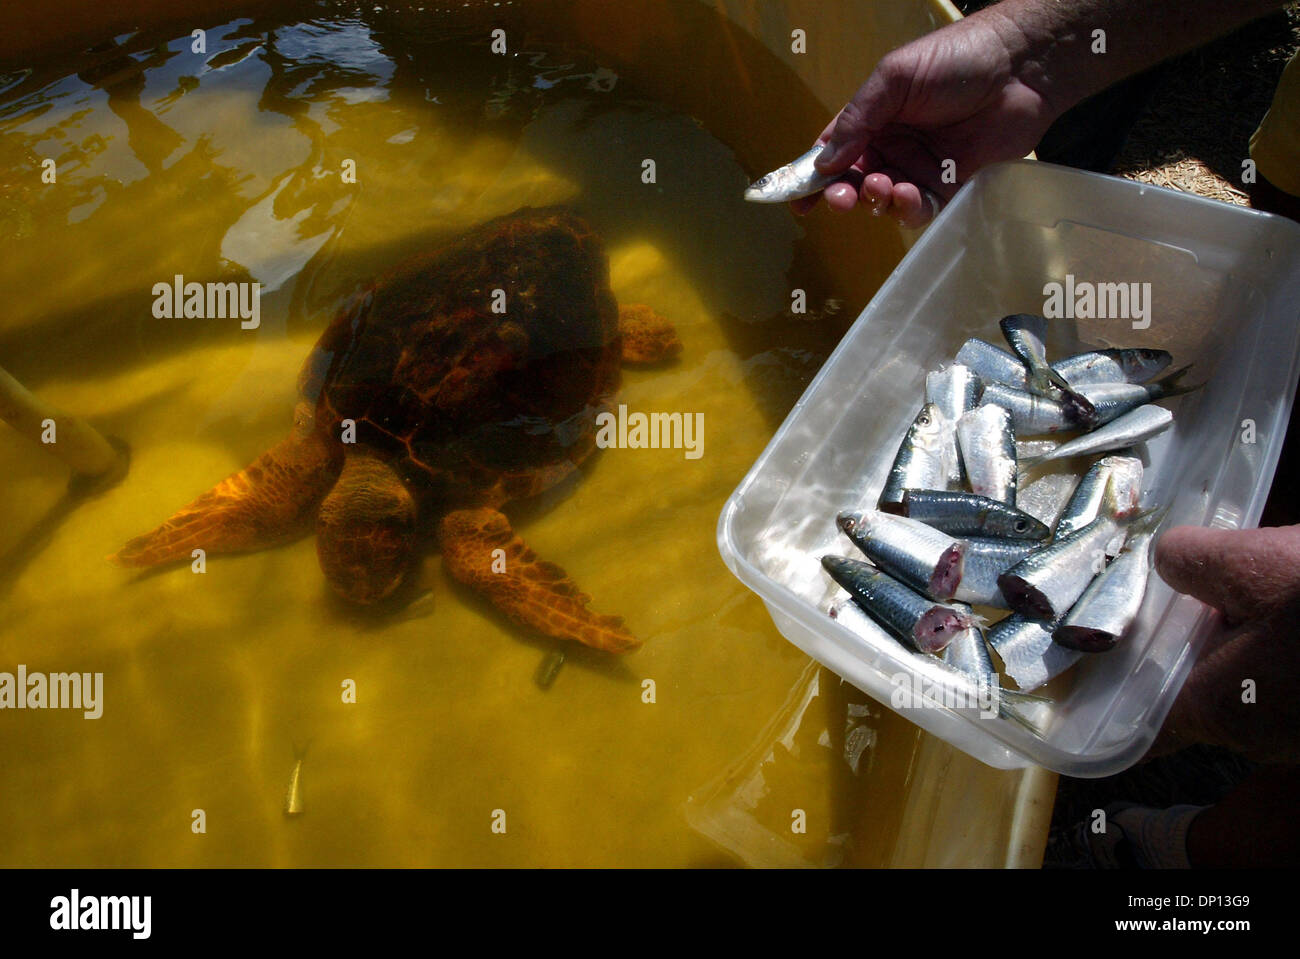 Apr 14, 2006; Juno Beach, FL, USA; At The Marinelife Center of Juno Beach, Joy, a loggerhead turtle, enjoys a meal of sardines at feeding time. Joy was stranded on a beach in North Palm Beach in December 2005 and rescued. X-rays revealed some intestinal gas, which is what caused the turtle to float and come ashore. This turtle is anemic and is being treated with vitamins, iron and  Stock Photo